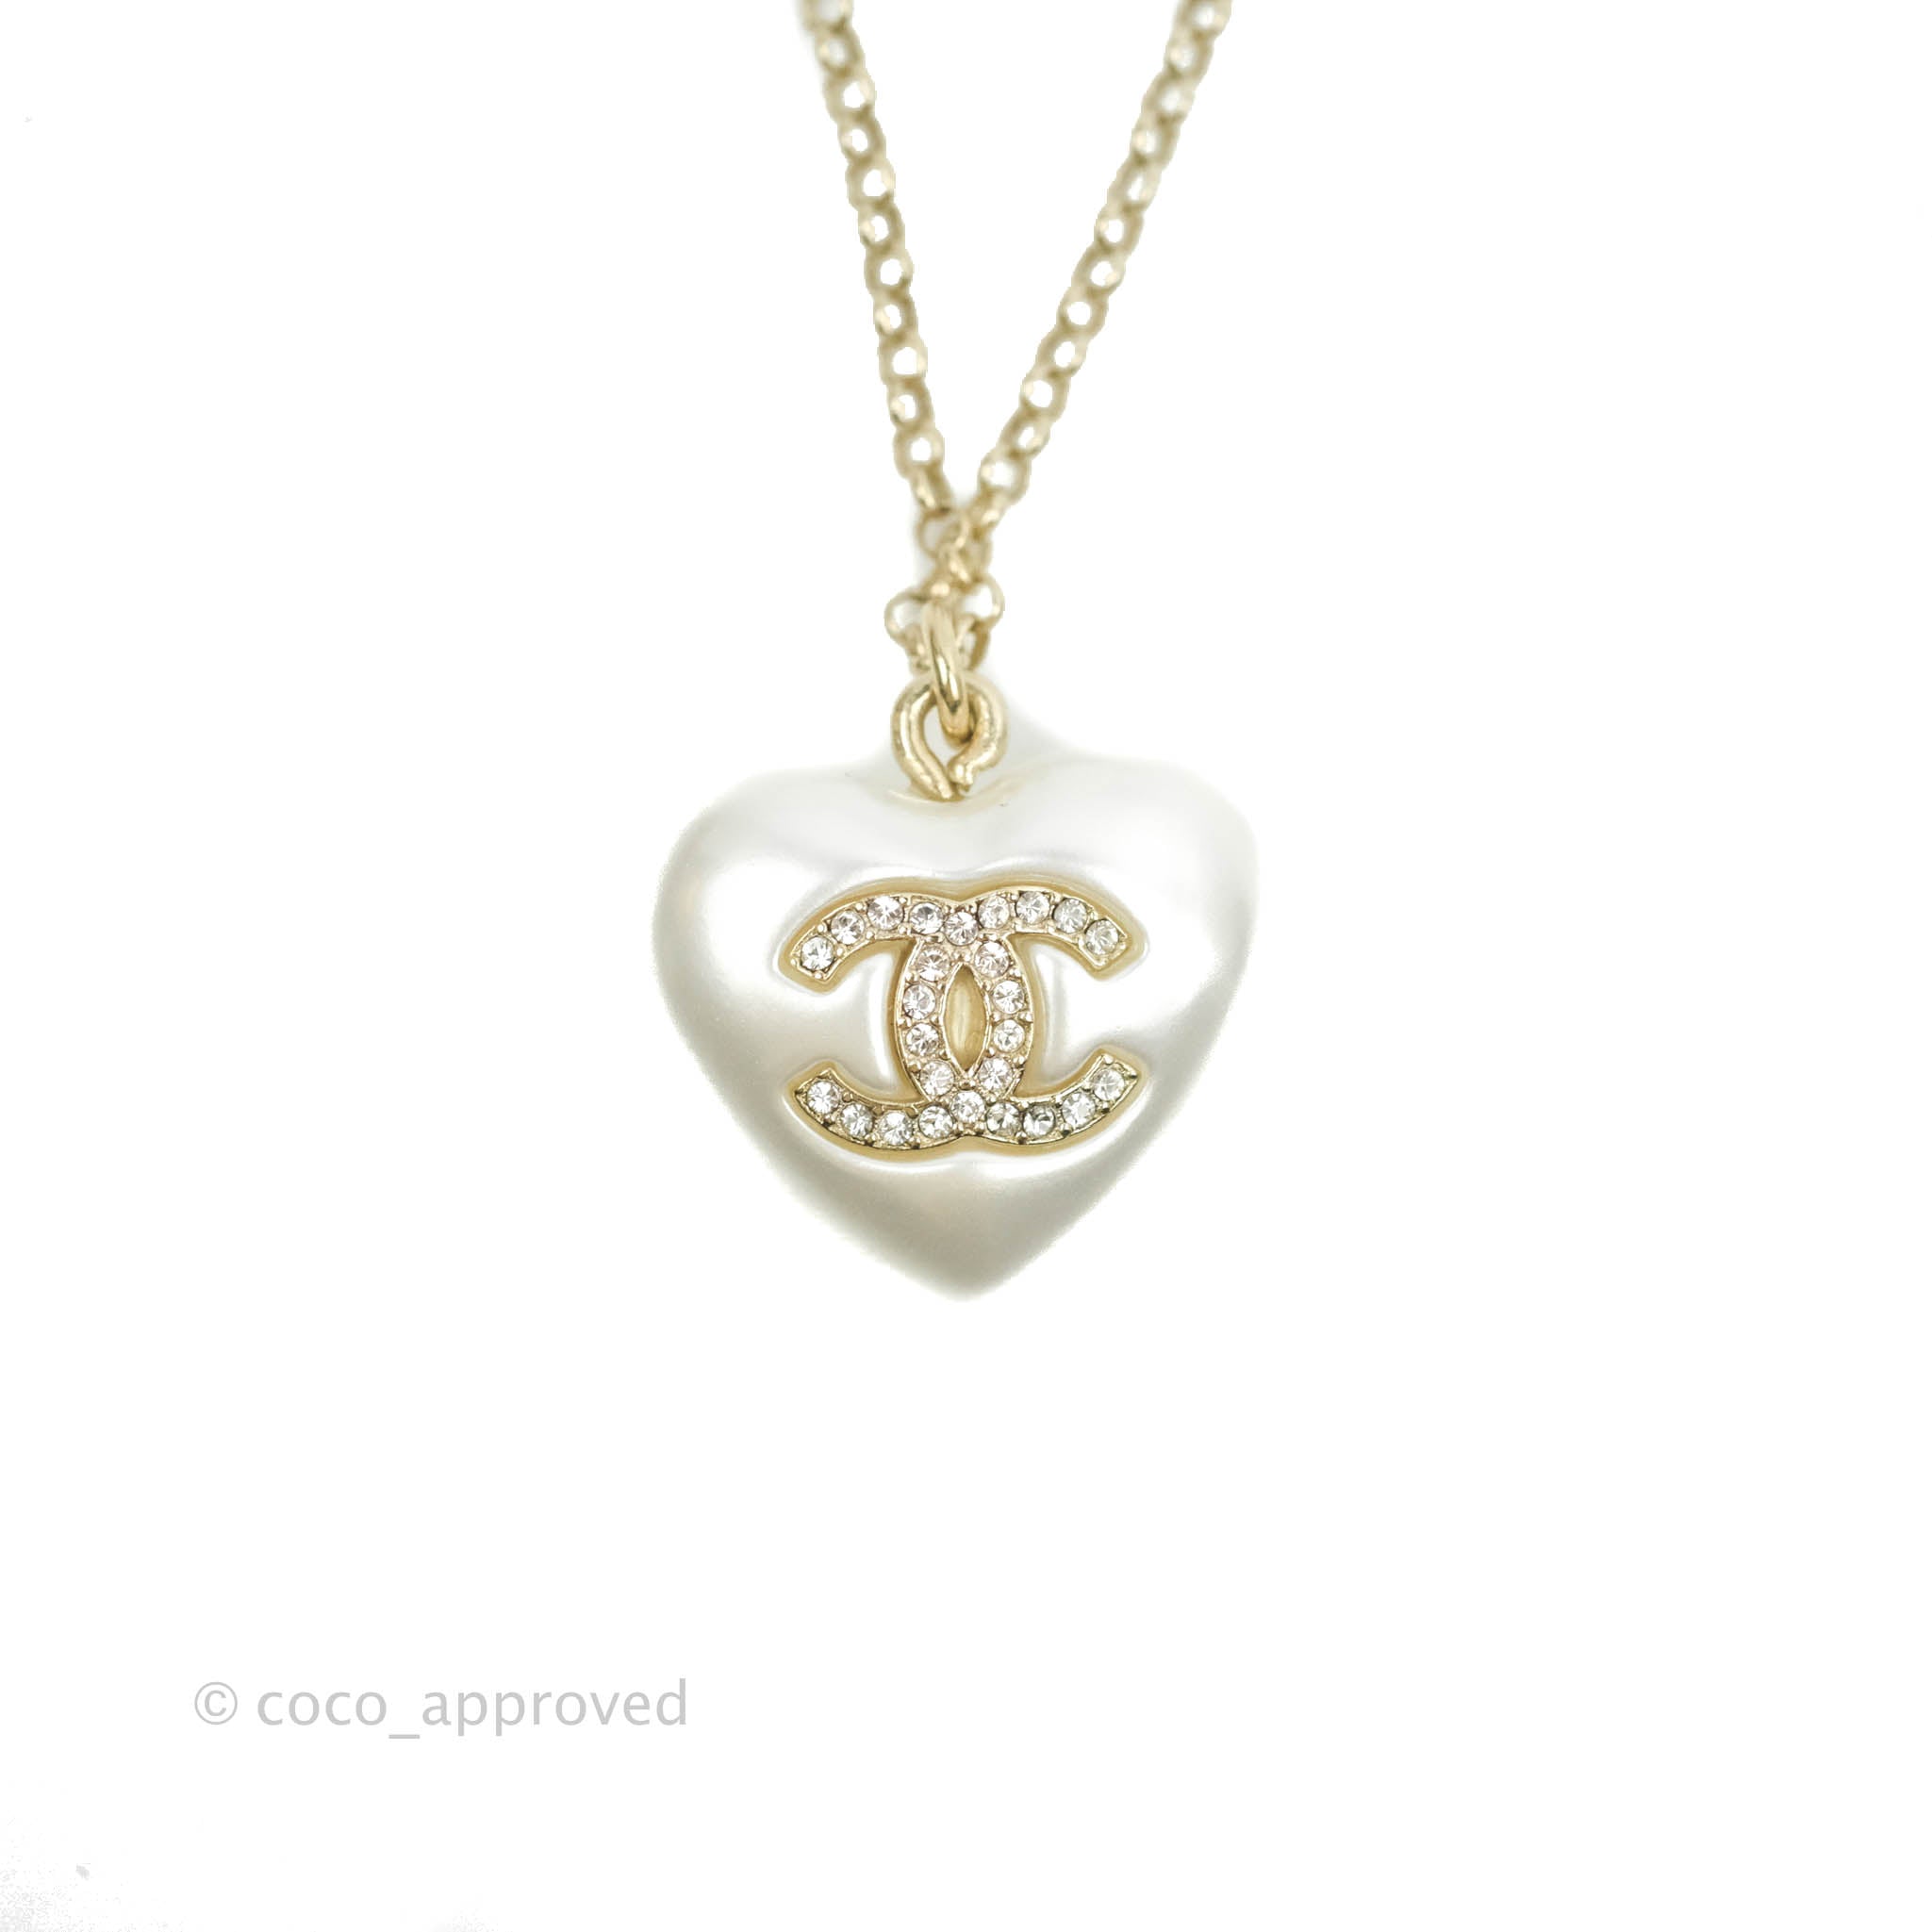 CHANEL, Jewelry, Chanel Cc Heart Pearl Necklace